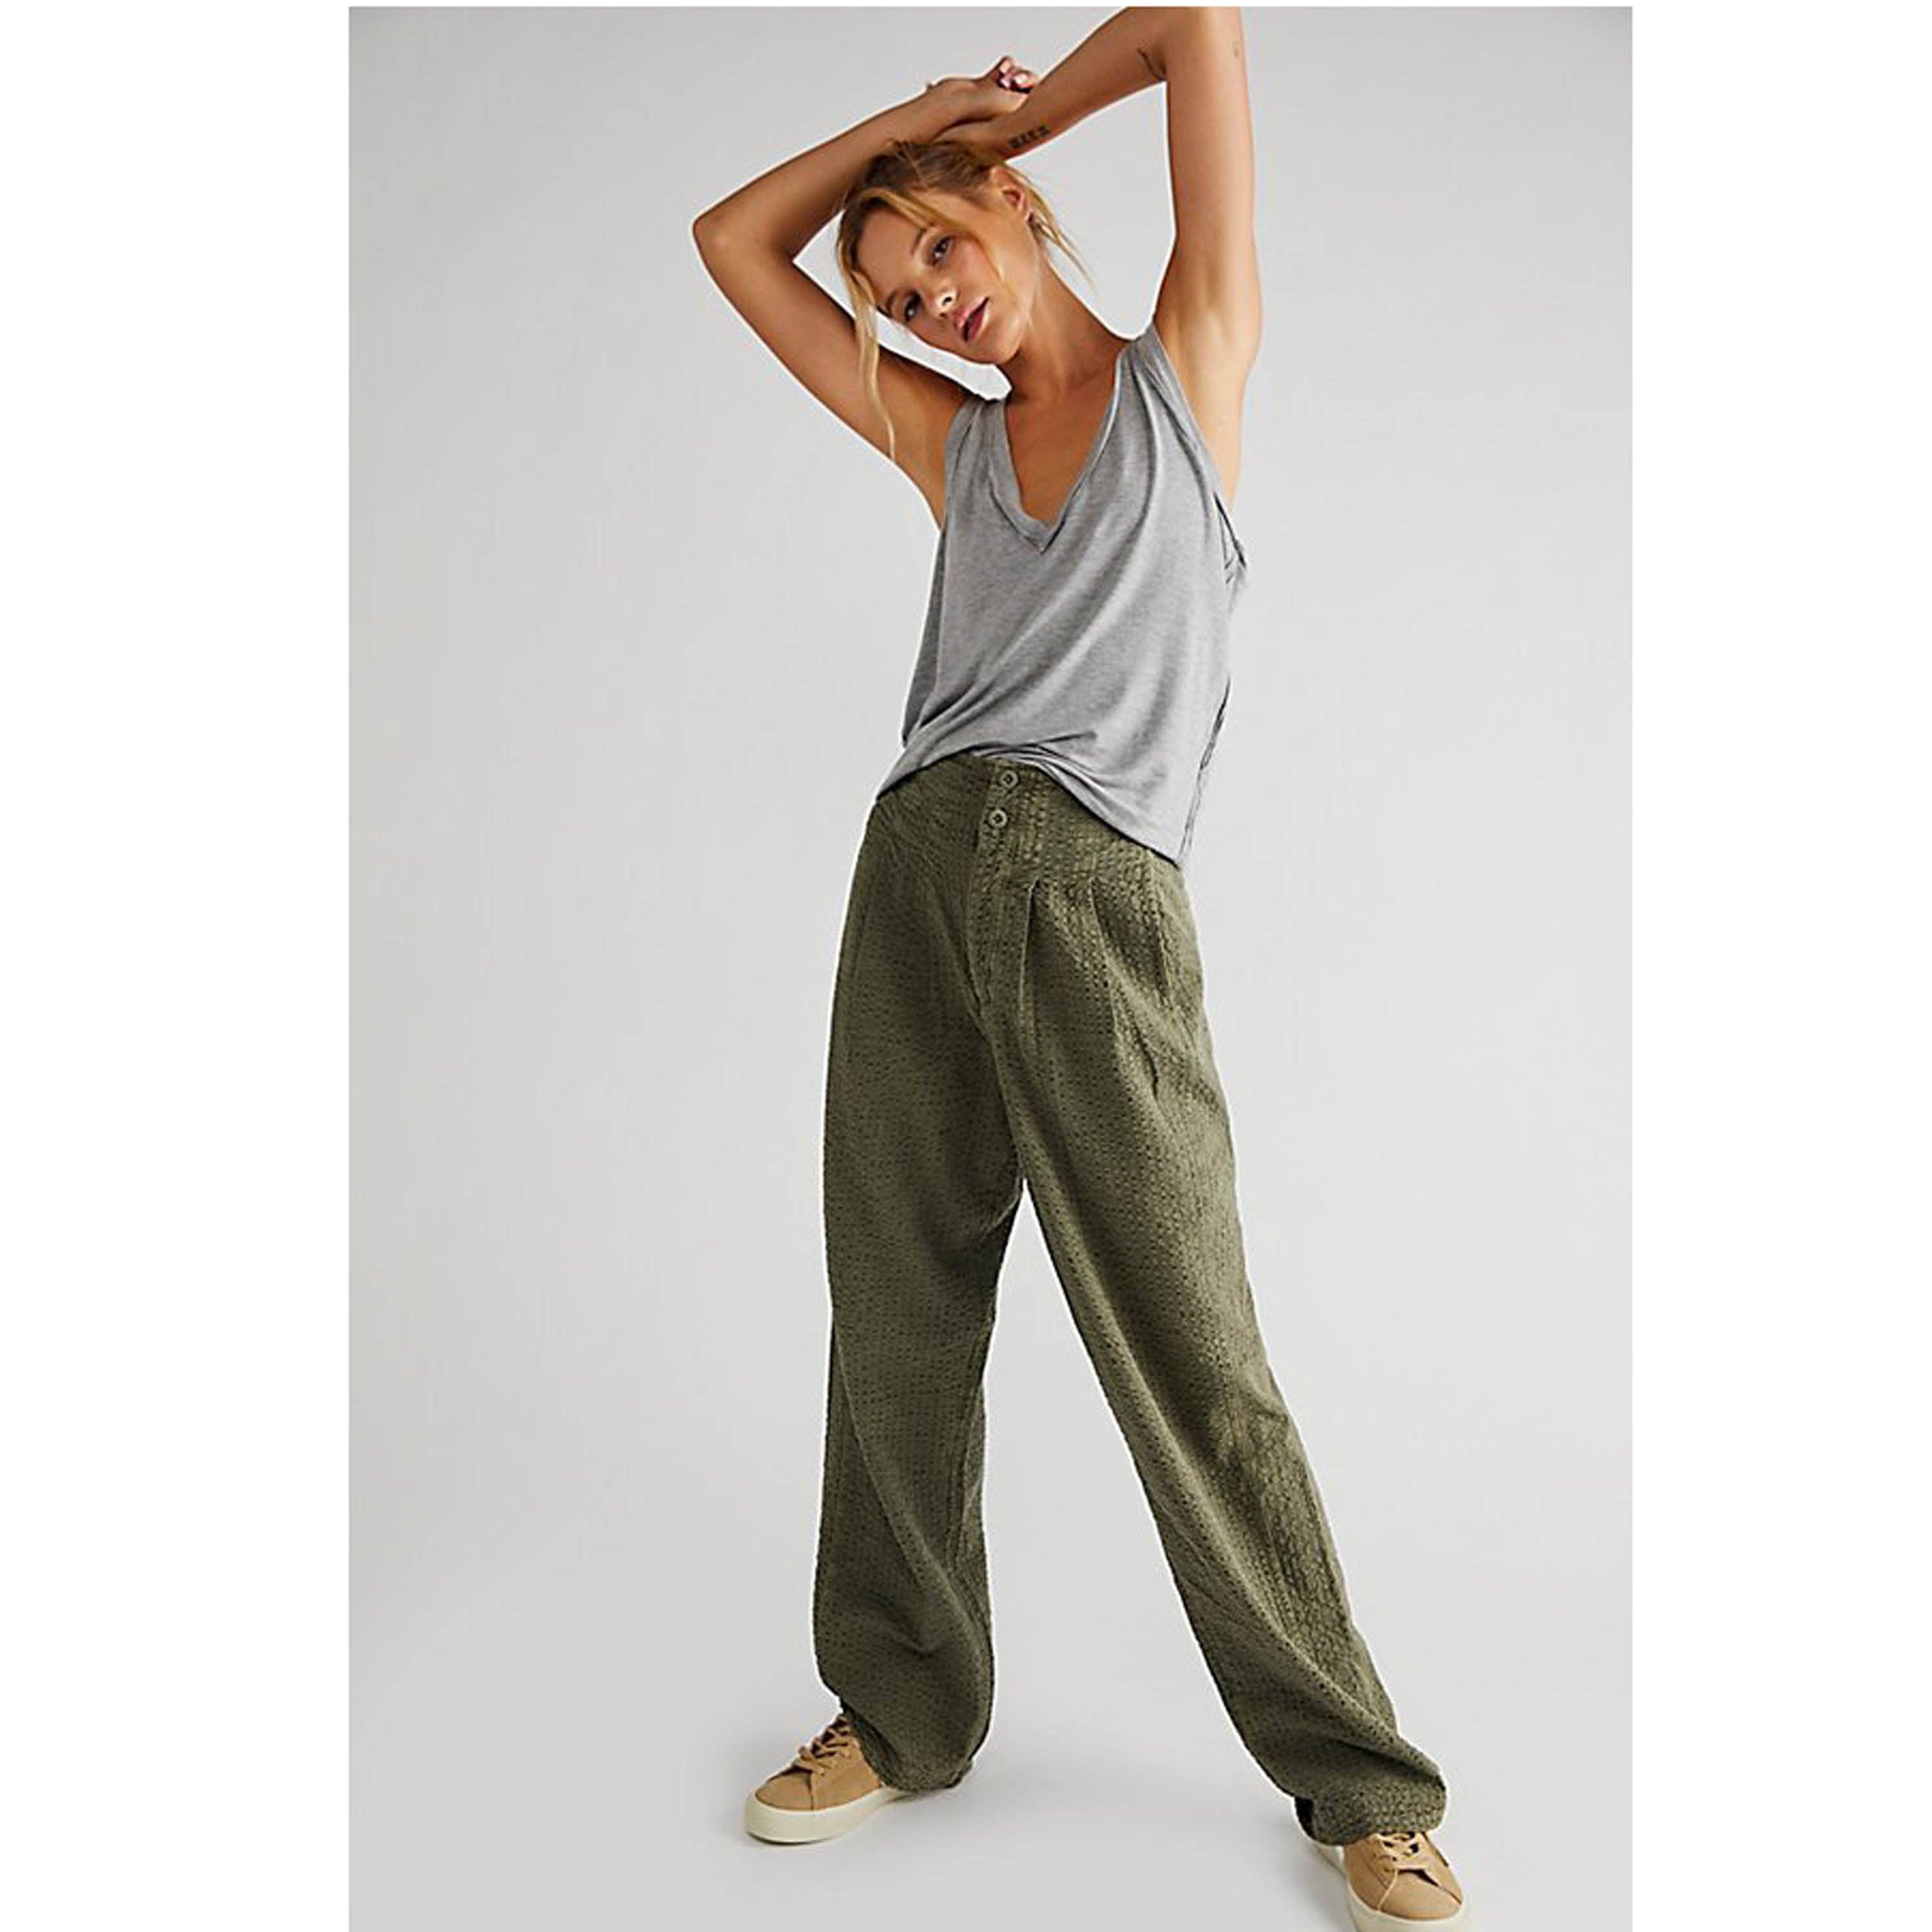 Trending Wholesale ladies chino pants At Affordable Prices –